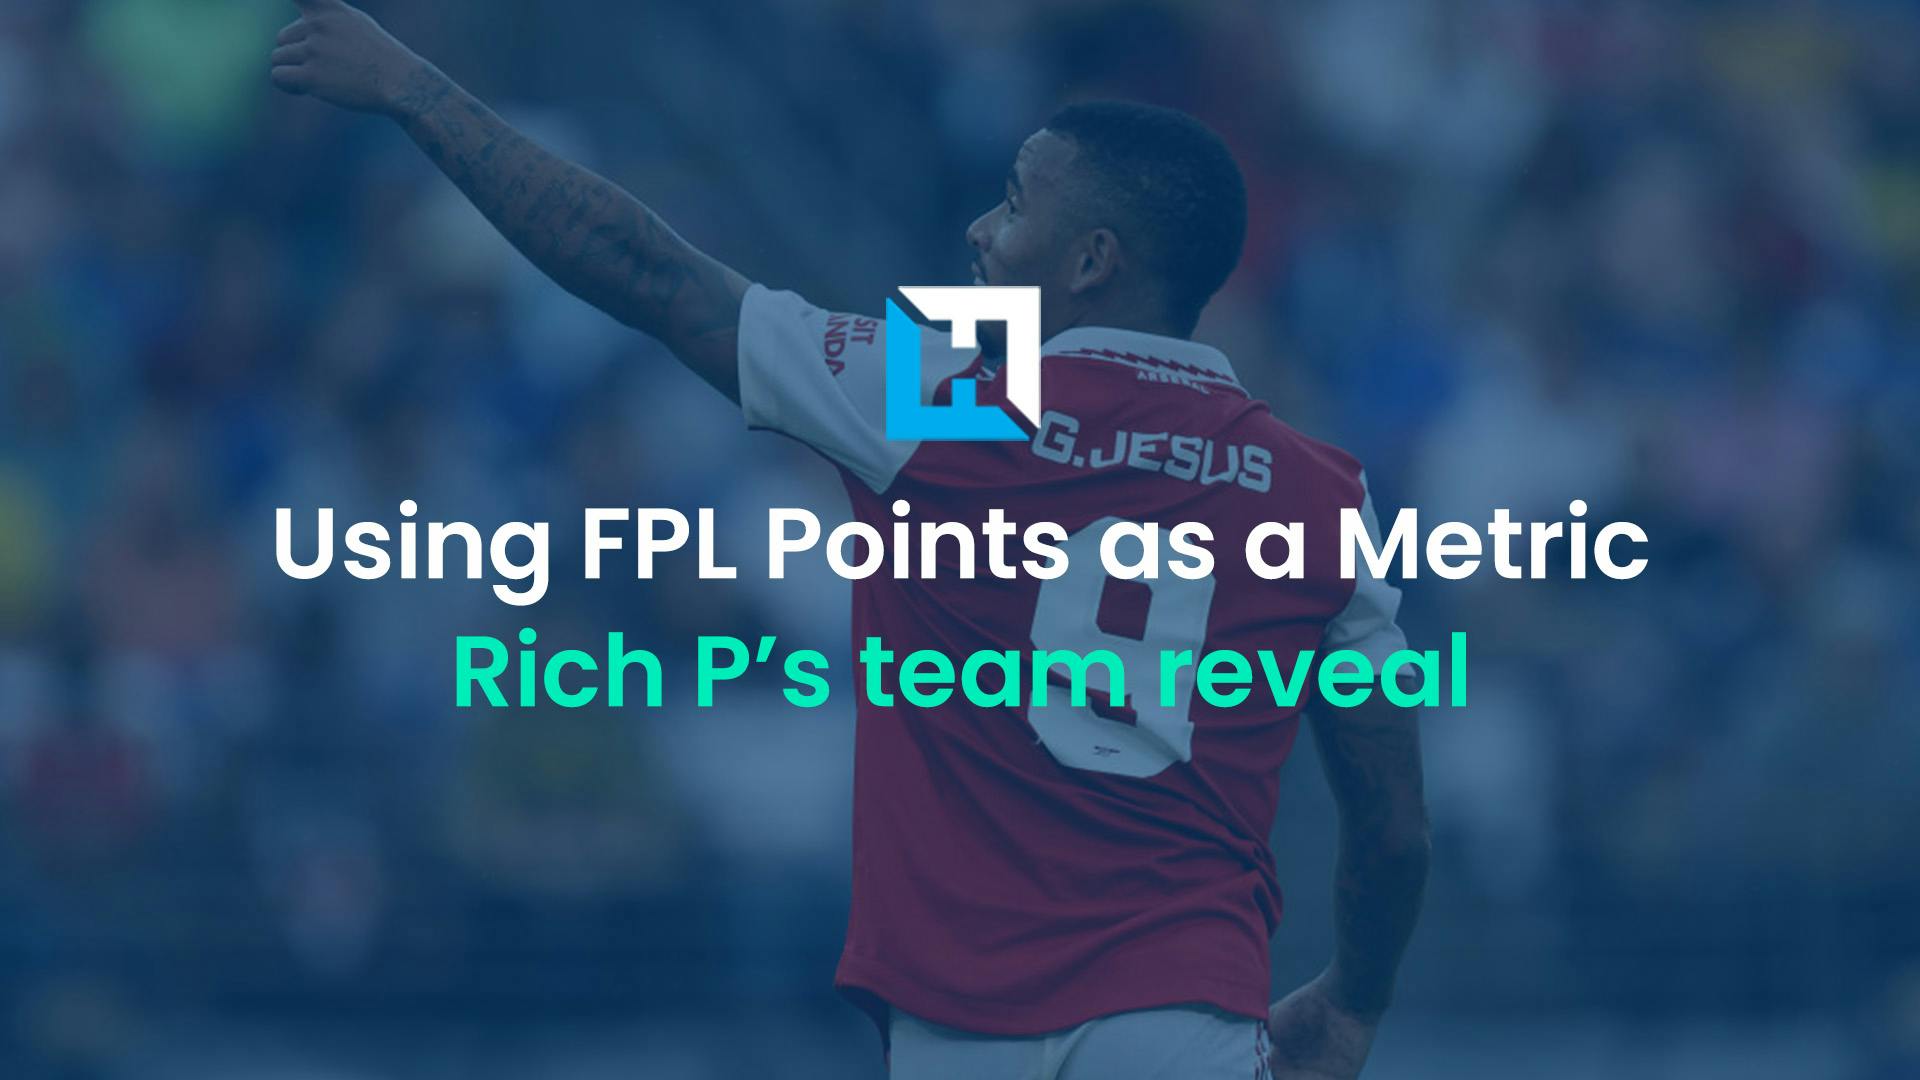 Using FPL Points as a Metric: Gameweek 7 team reveal 2022/23